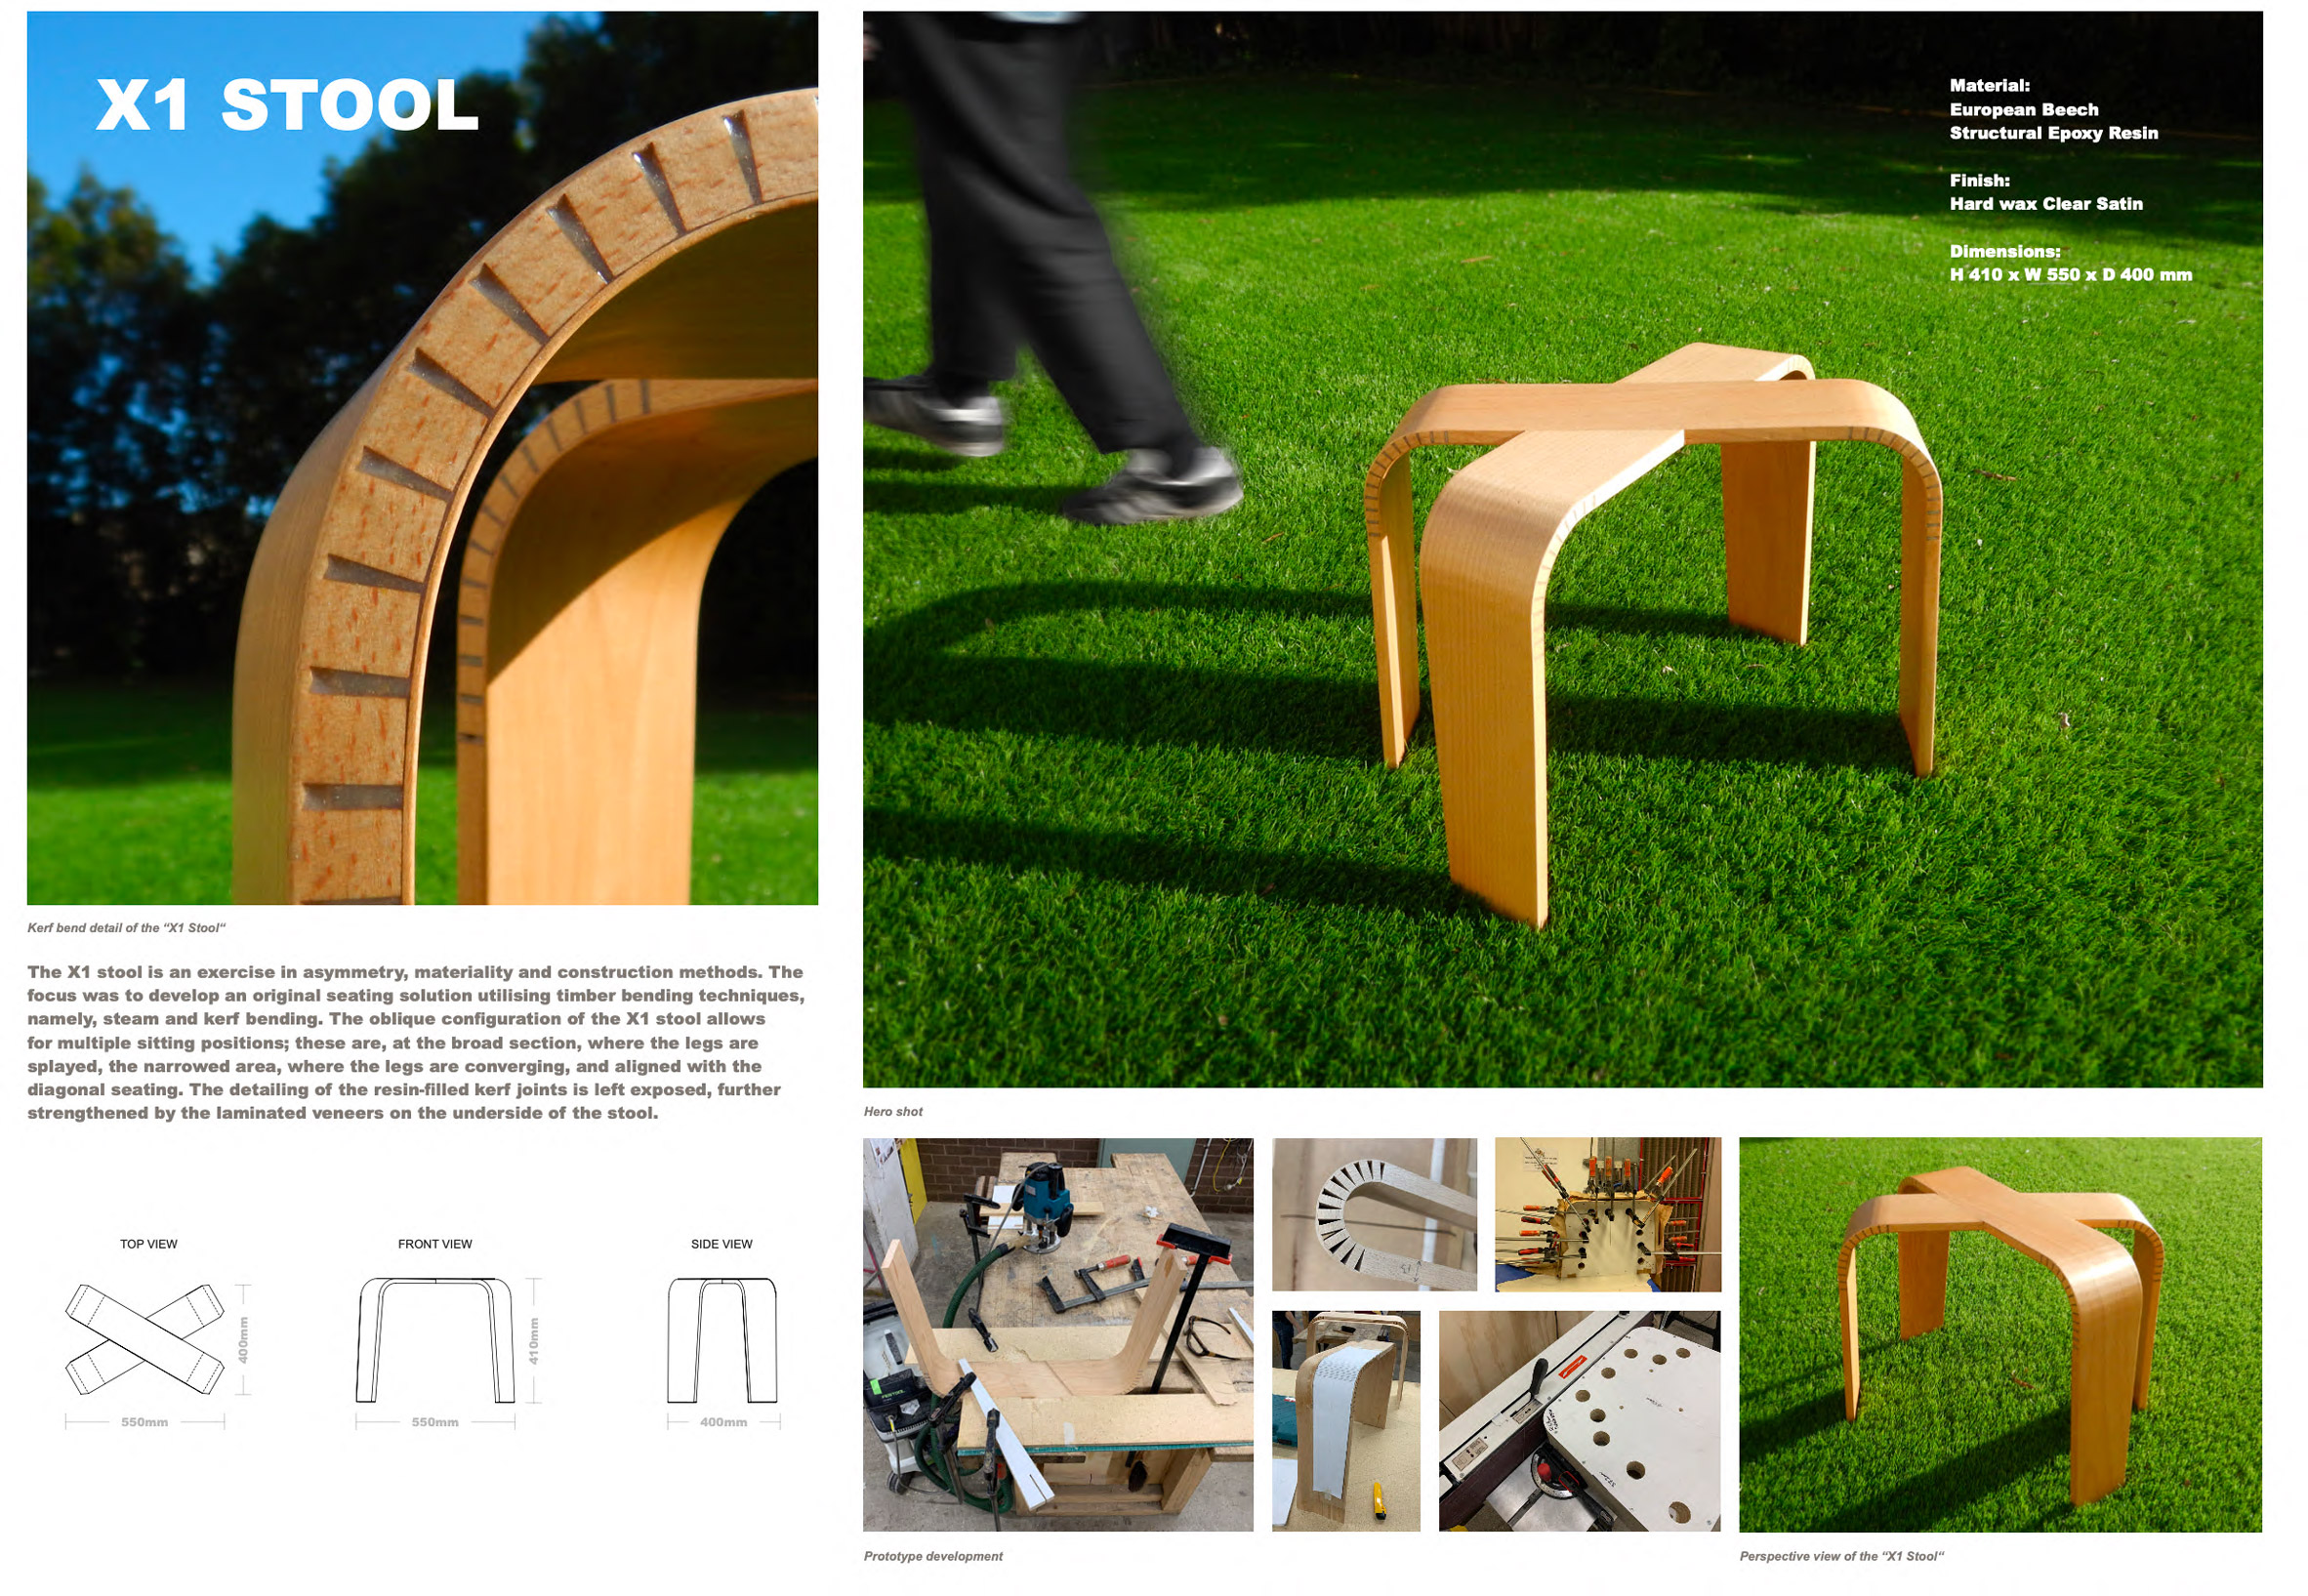 A series of photographs of the X1 stool, which is a pale wooden stool